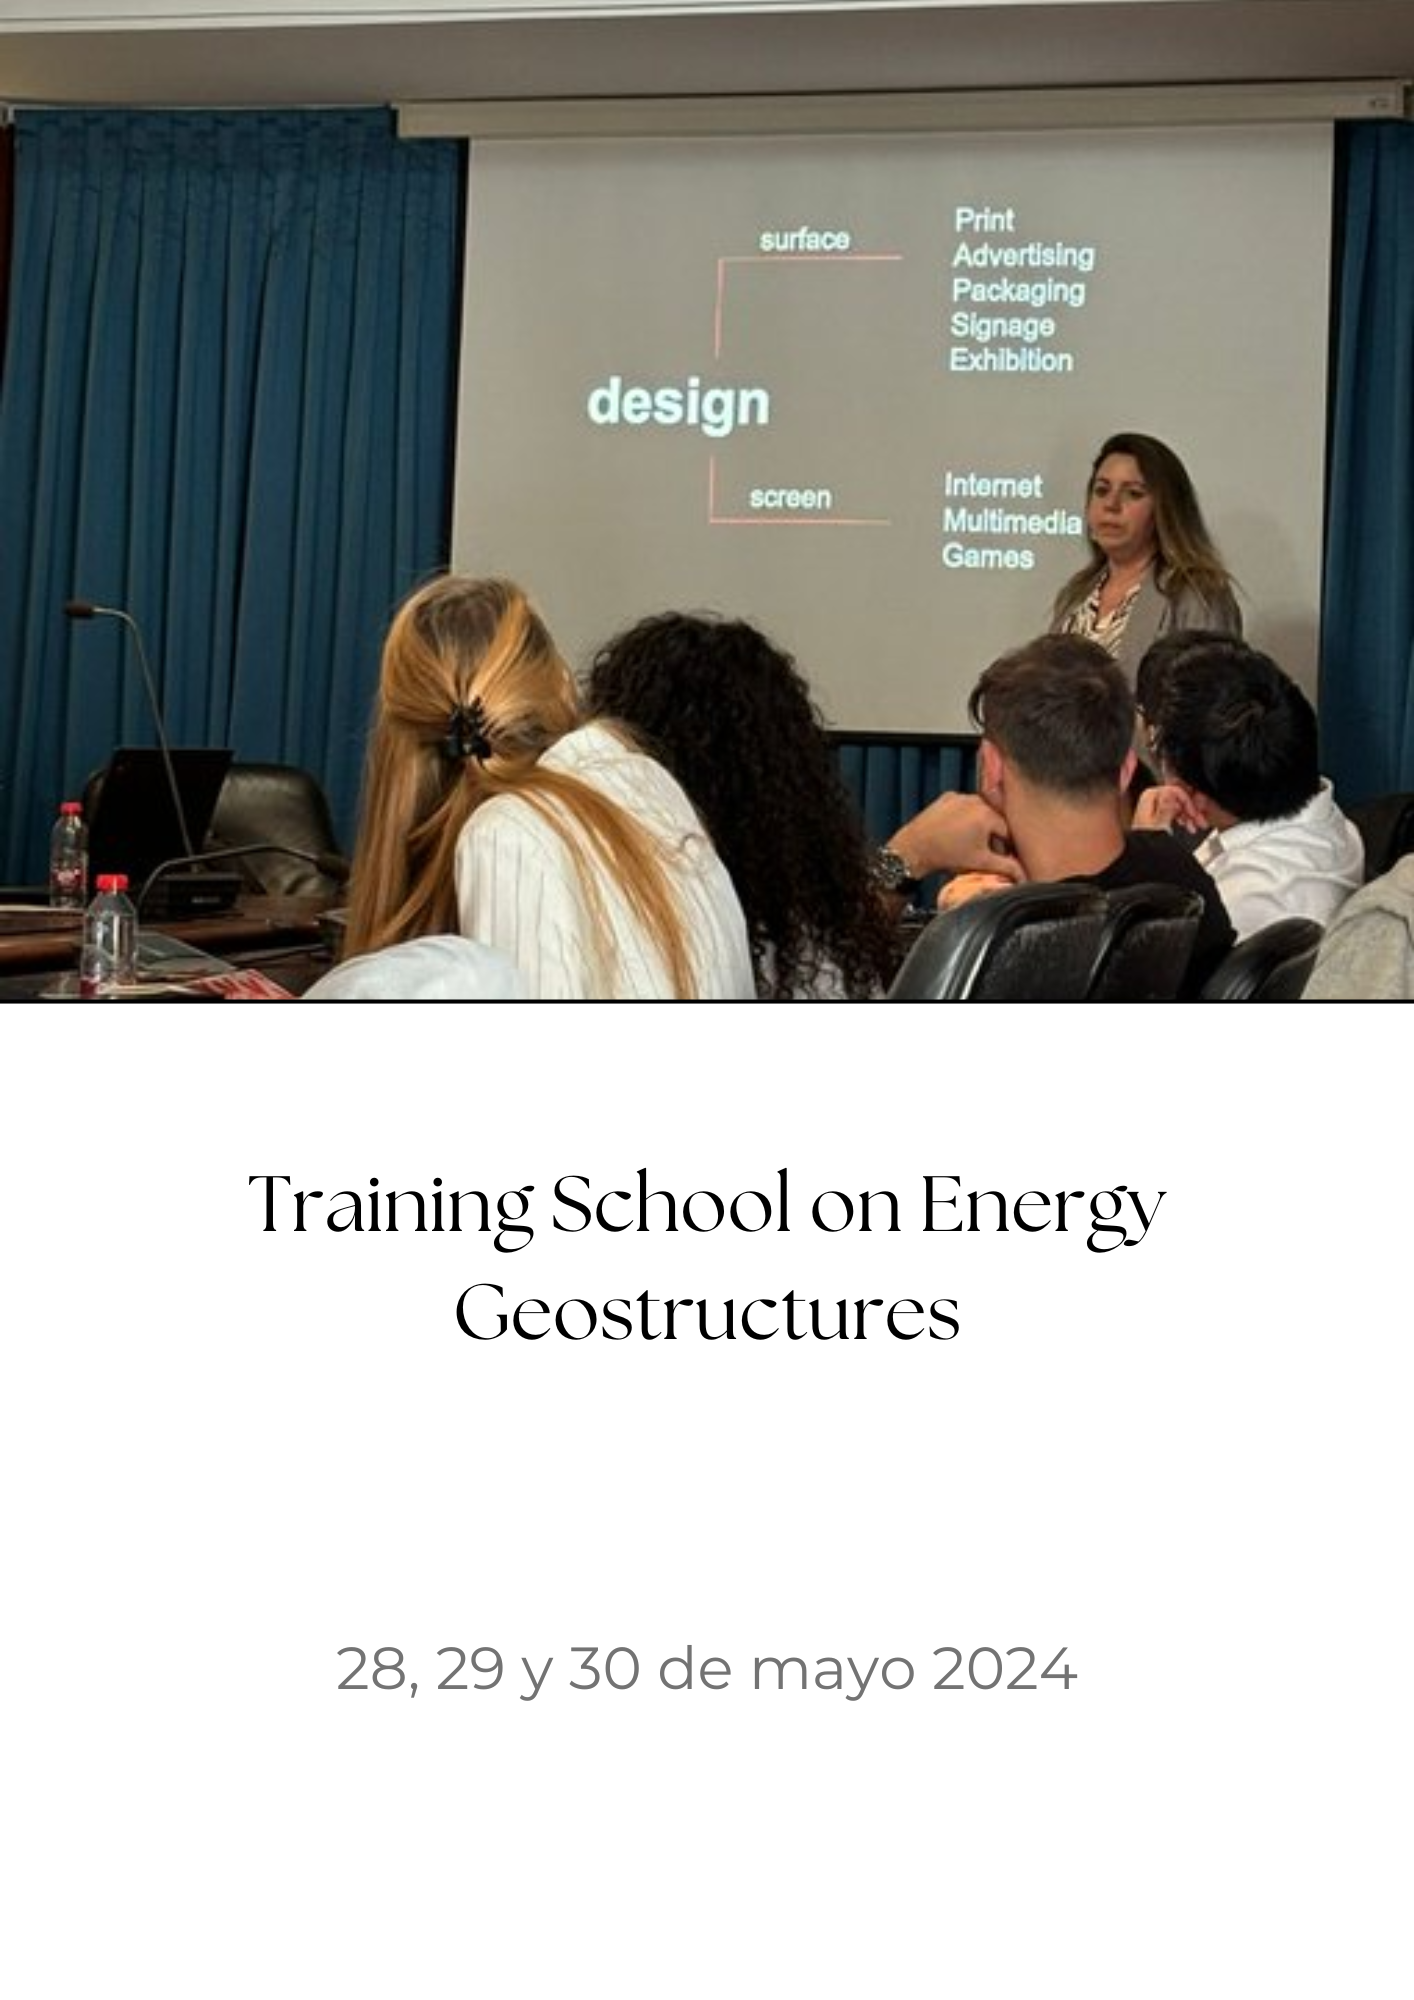 Training School on Energy Geostructures